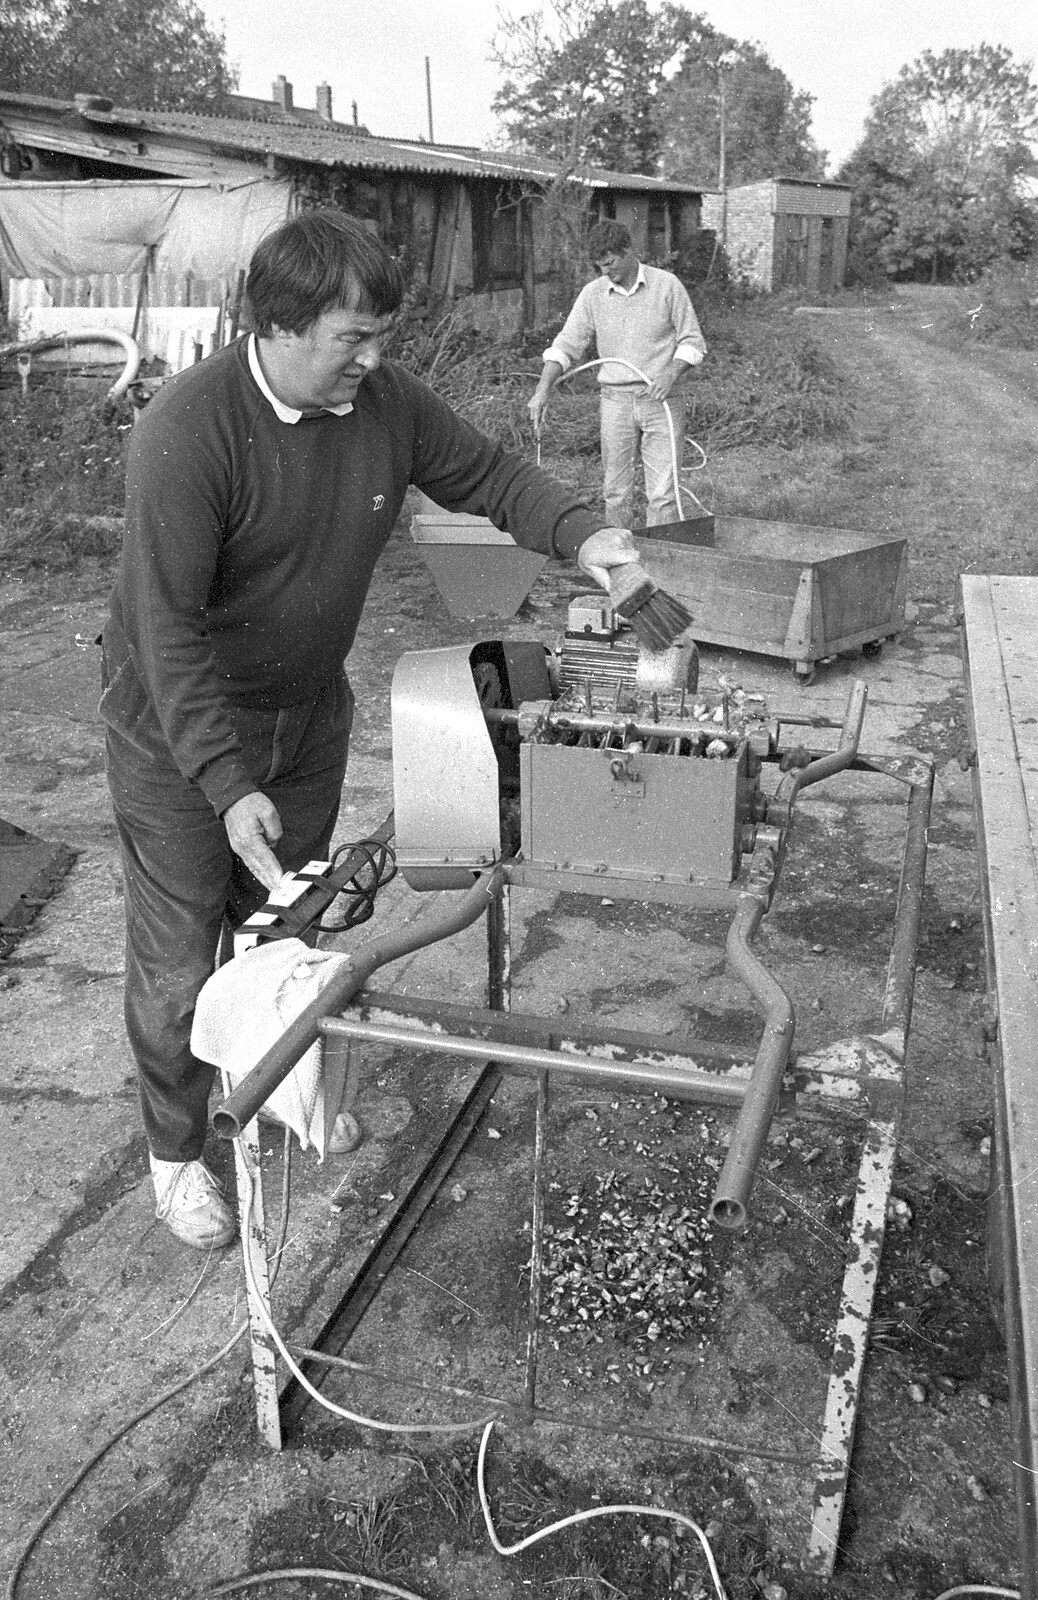 Corky cleans the chopper blades from Cider Making in Black and White, Stuston, Suffolk - 11th October 1992